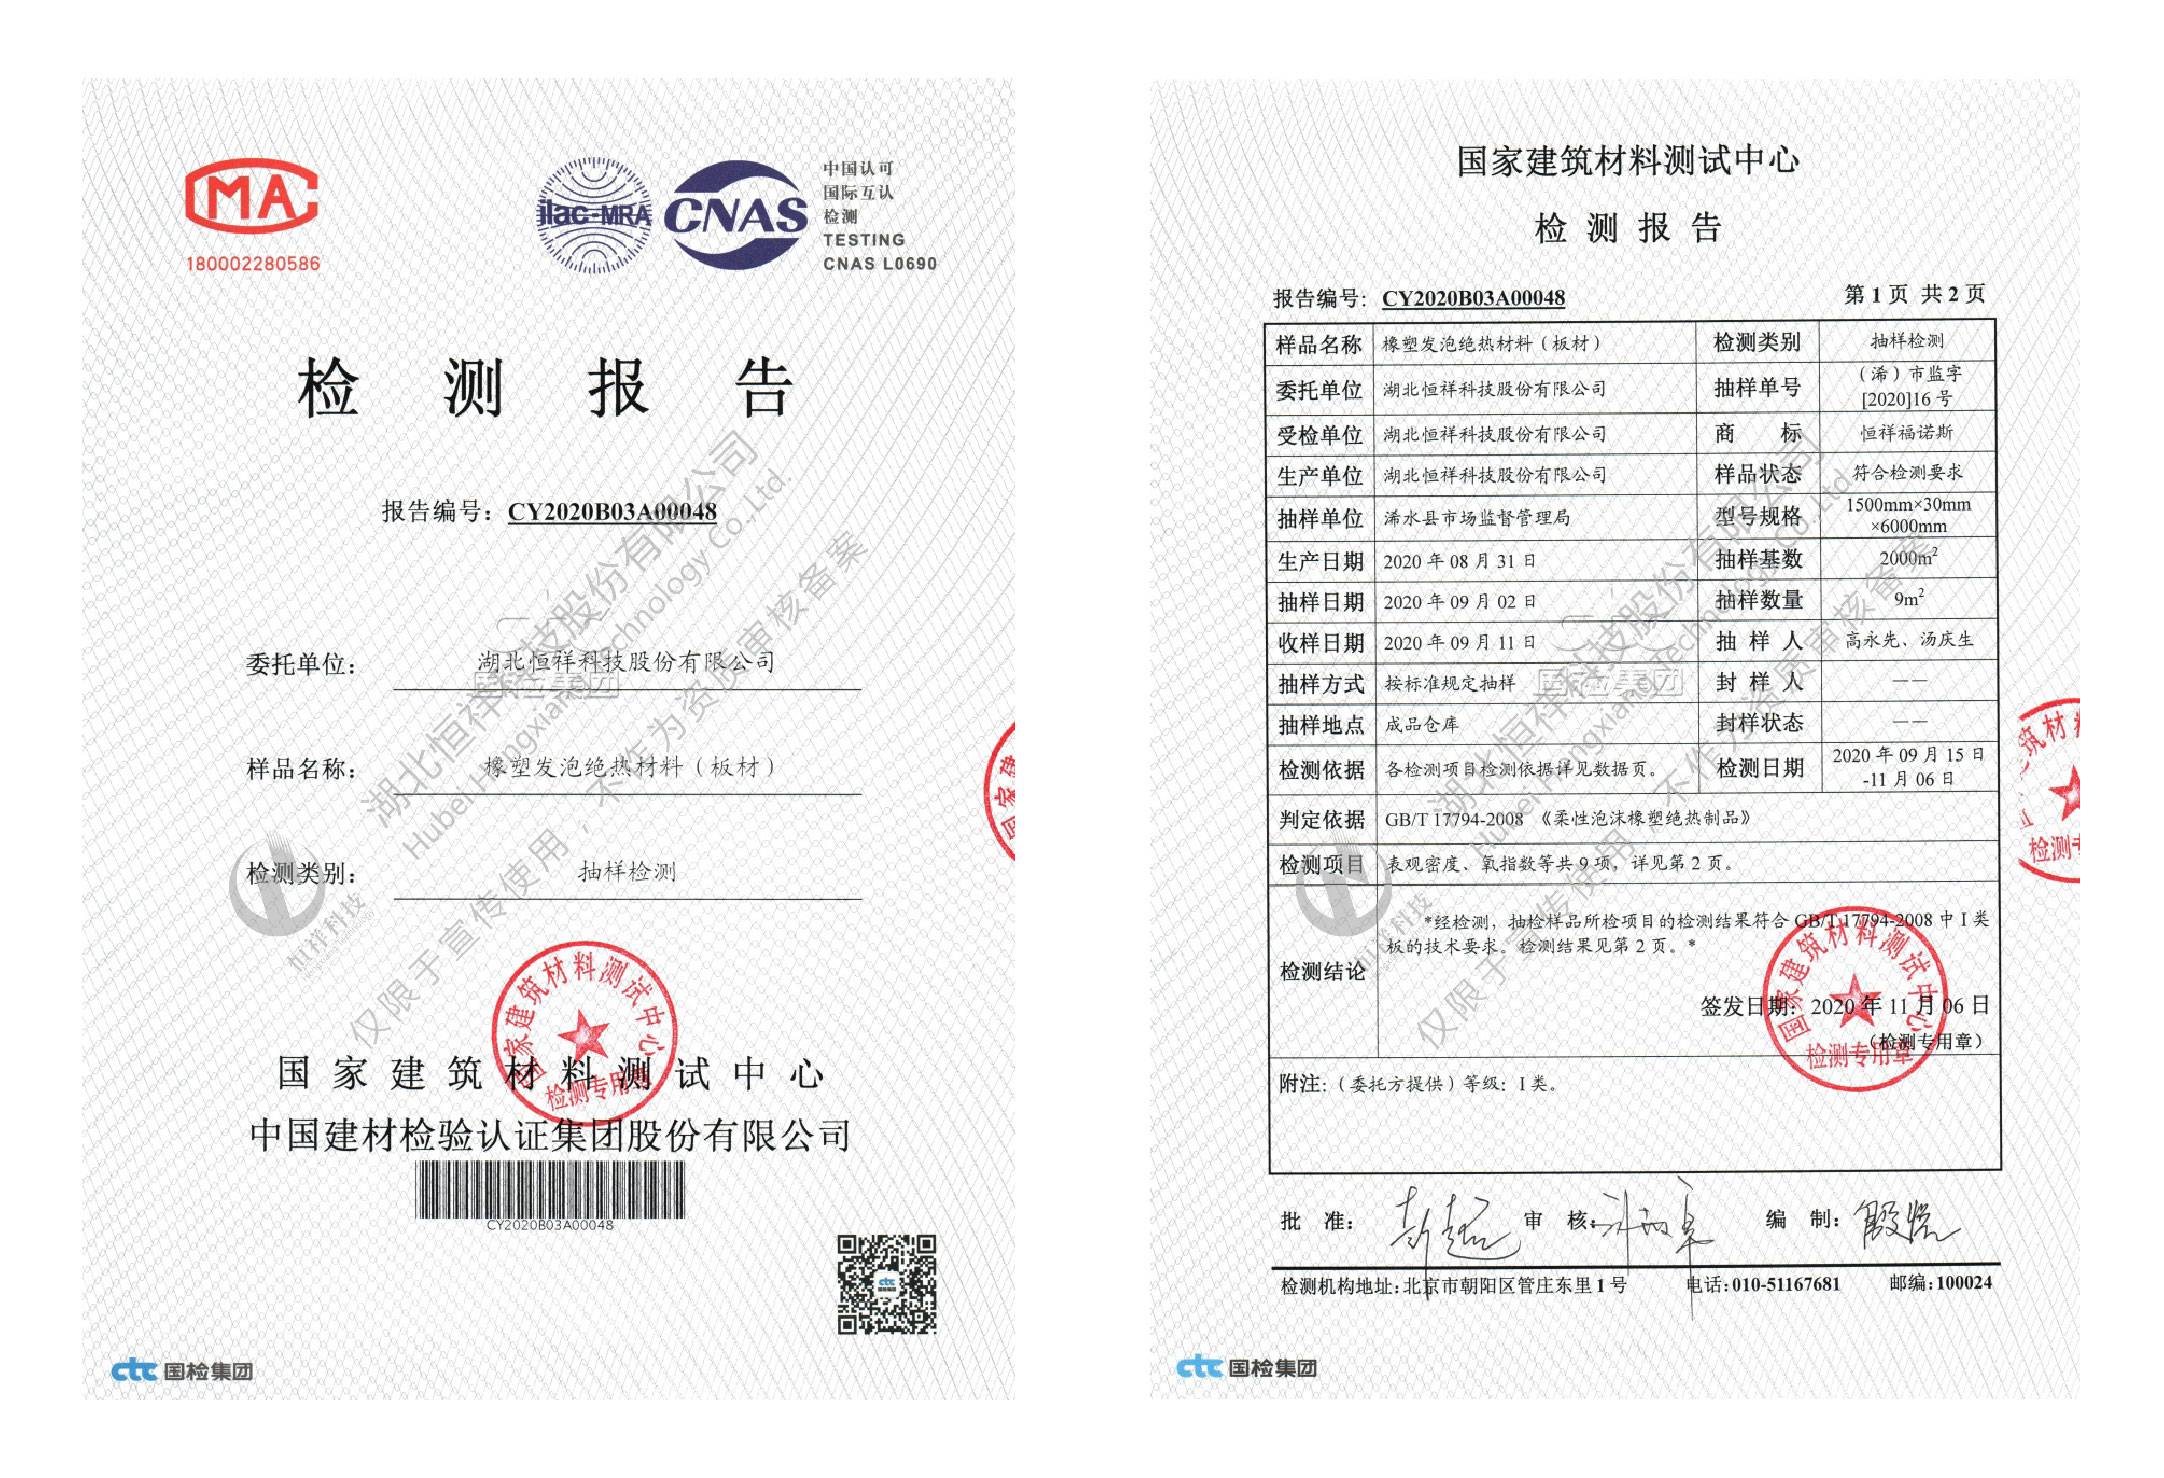 HengXiang  Funos CTC sampling test report (Plate)